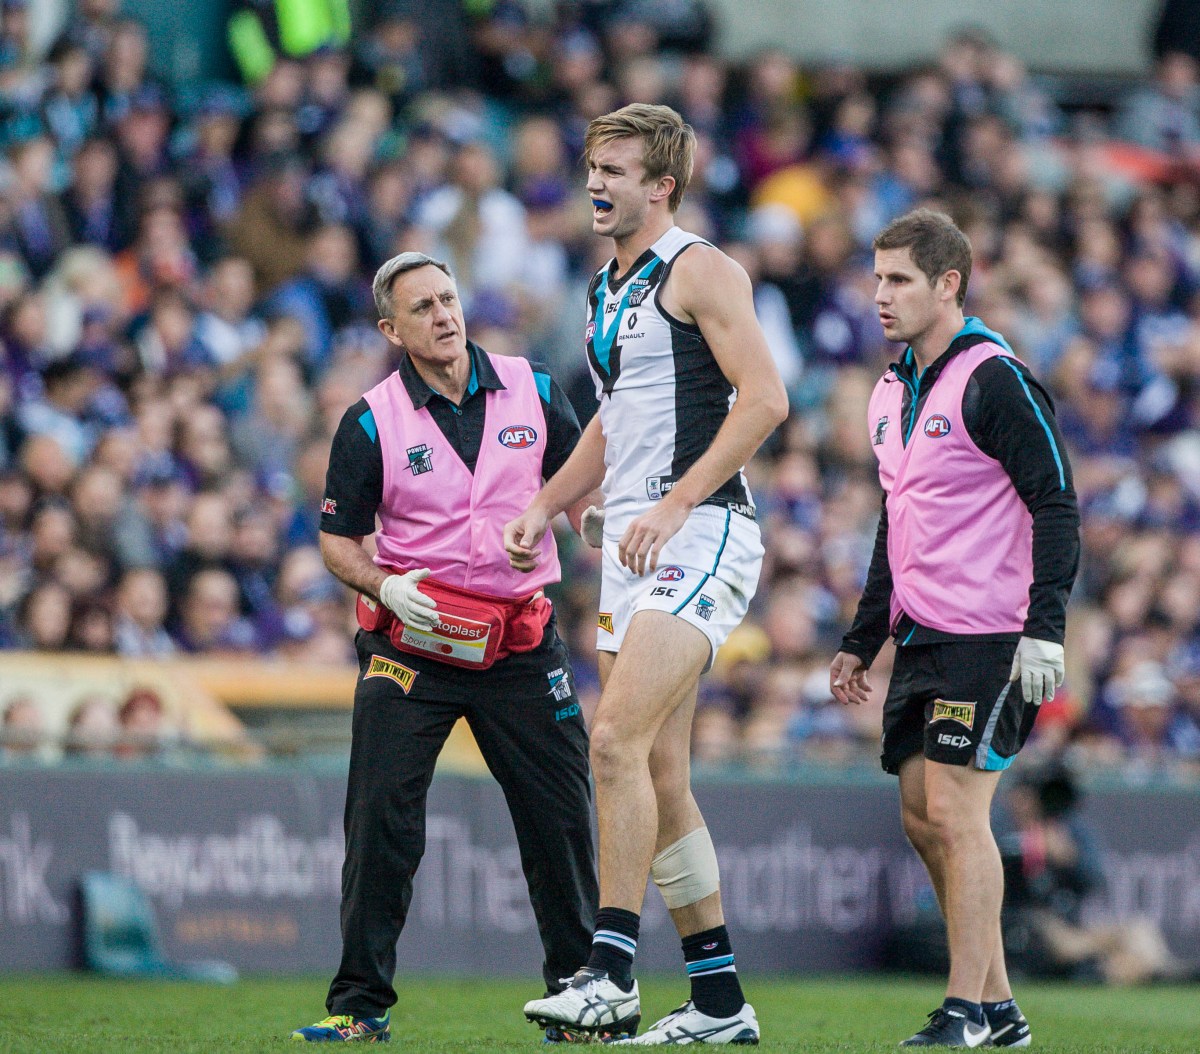 Dougal Howard of Port Adelaide is injured during the Round 13 AFL match between the Fremantle Dockers and Port Adelaide at the Domain Stadium in Perth, Saturday, June 18, 2016.The Dockers won the match 86-69.(AAP Image/Tony McDonough) NO ARCHIVING, EDITORIAL USE ONLY